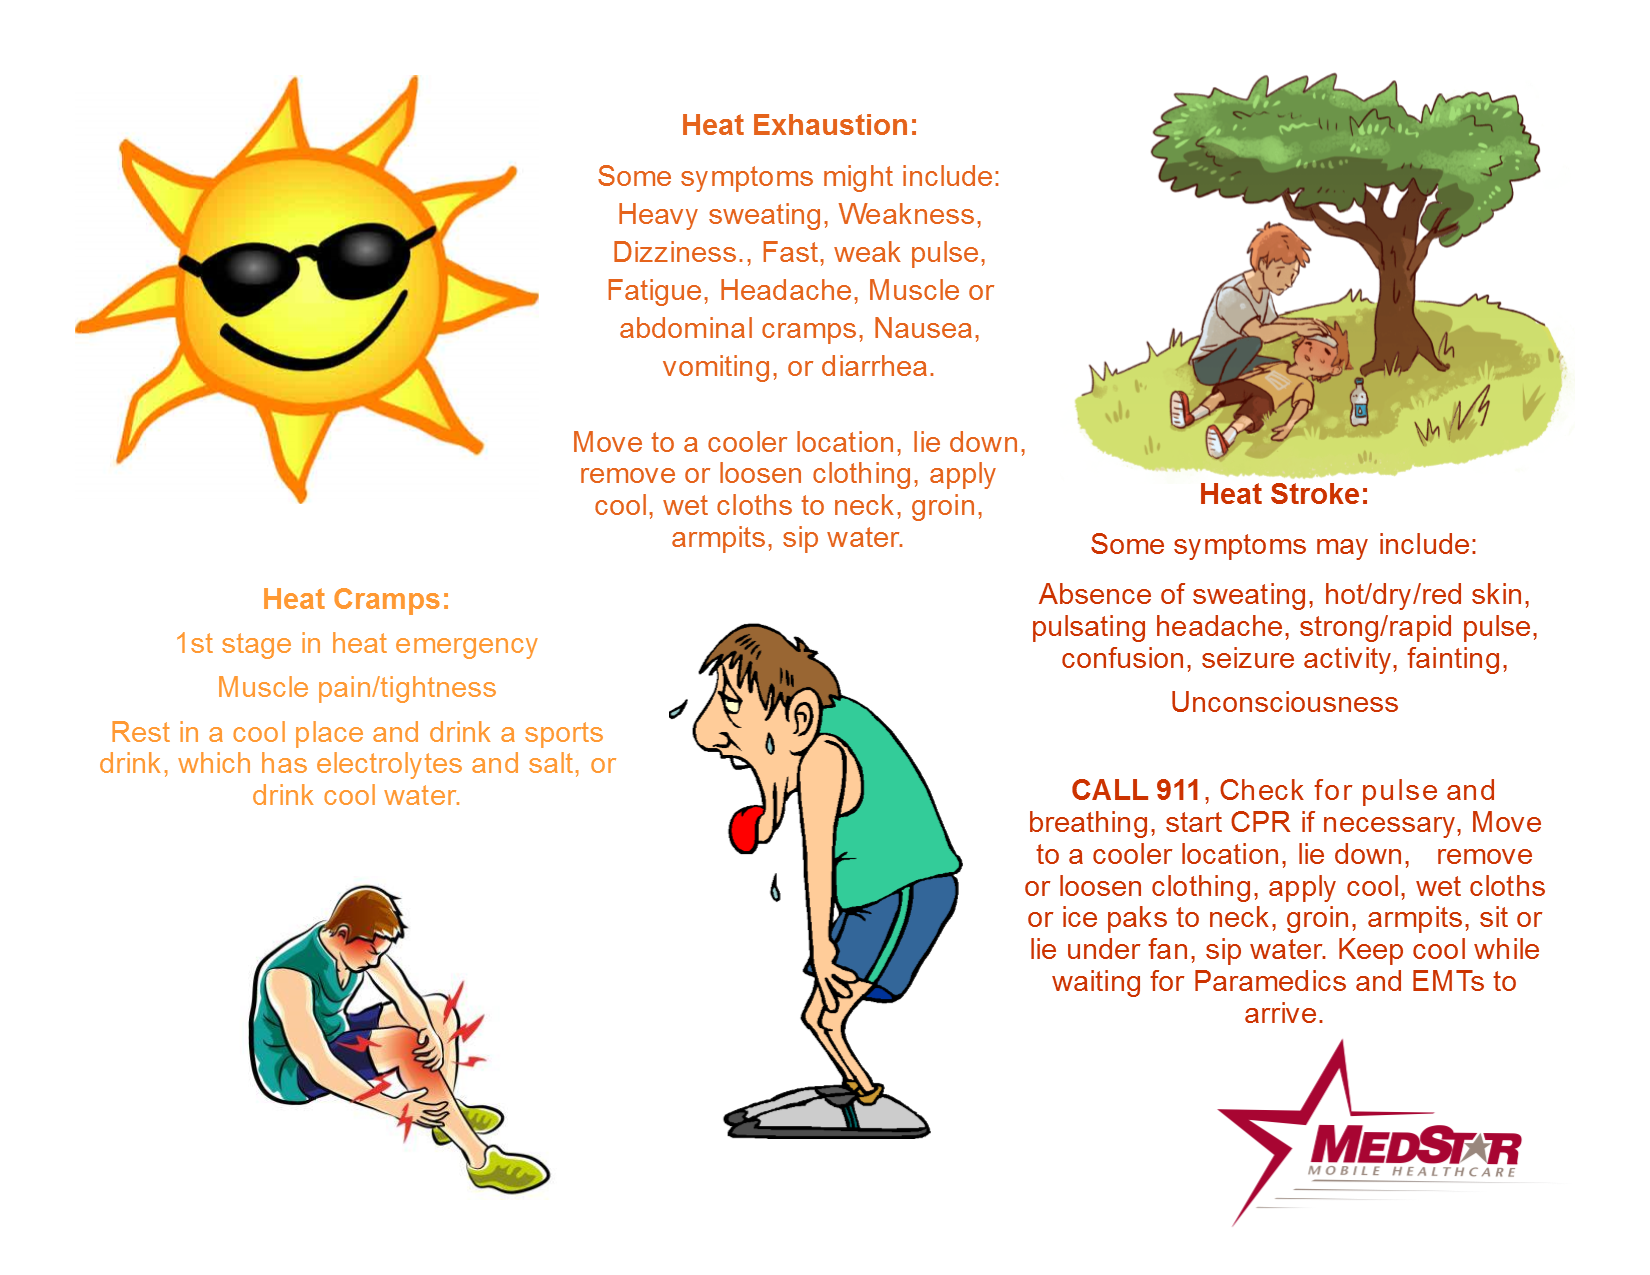 Preventing, Recognizing and Treating Heat-Related Emergencies | MedStar911